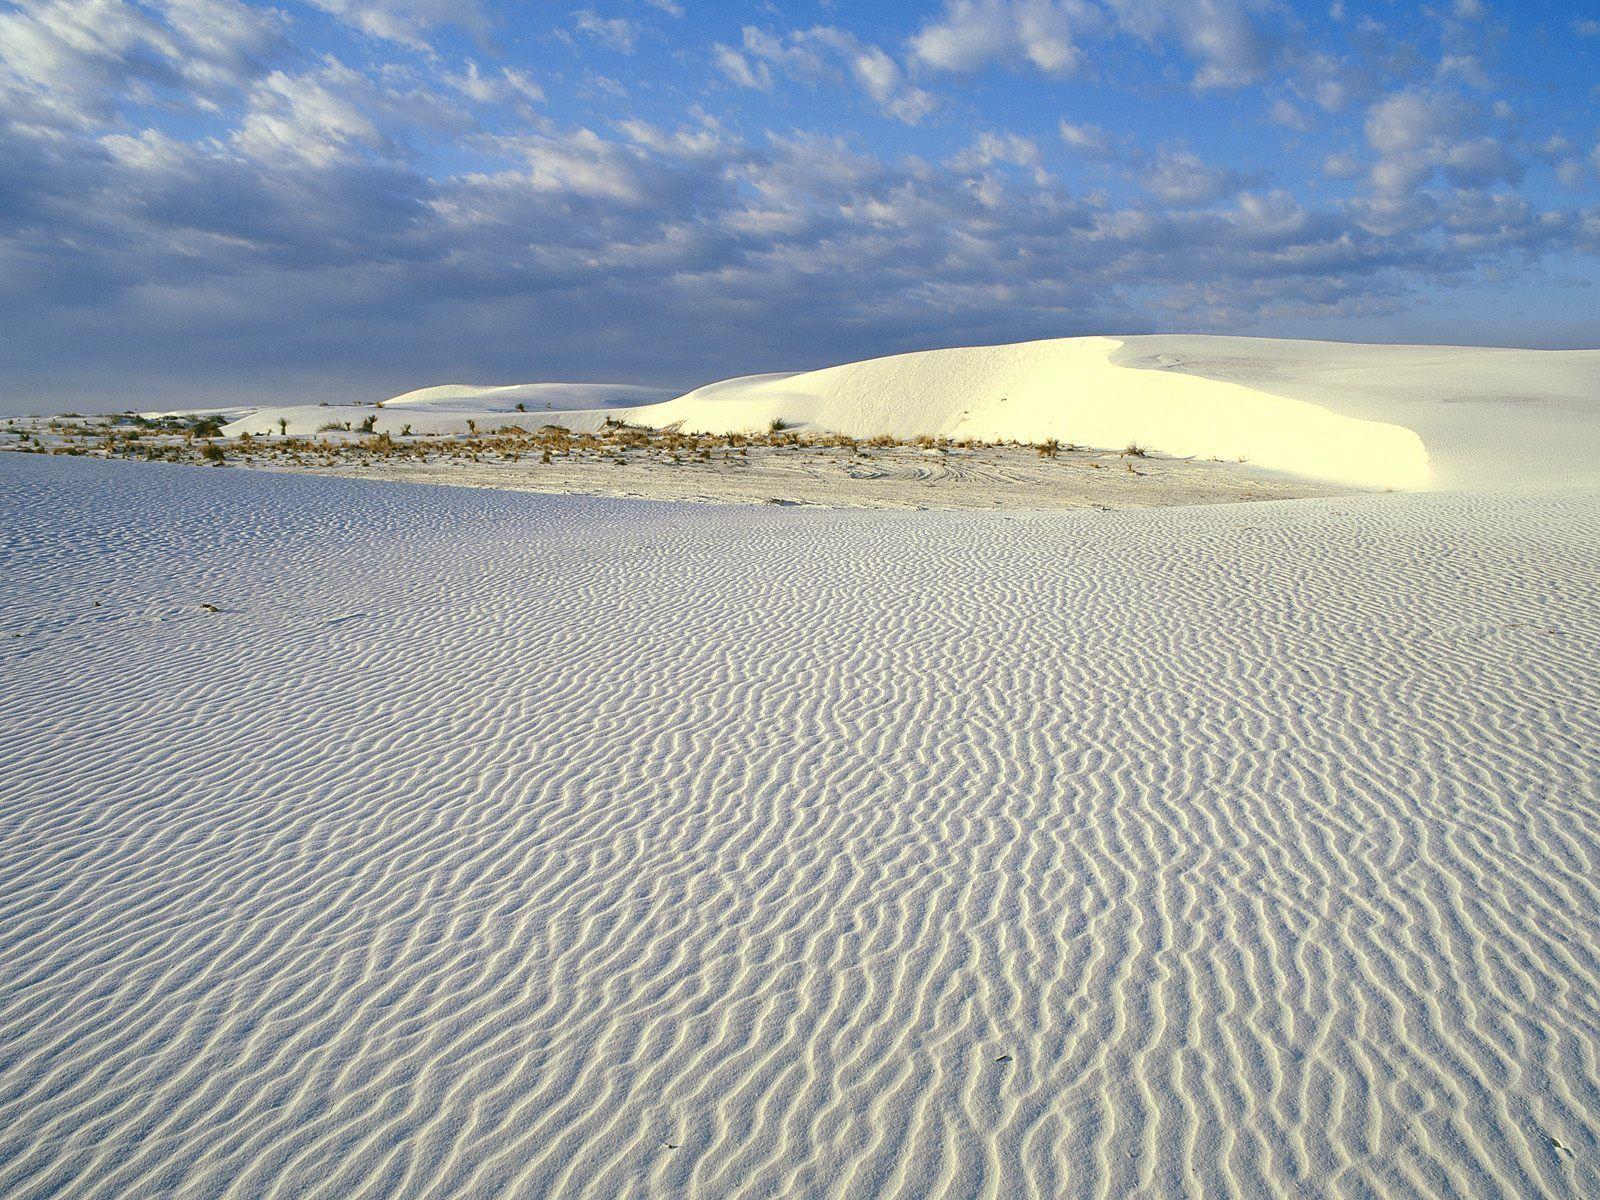 Gypsum Sand Dunes White Sands National Monument, New Mexico